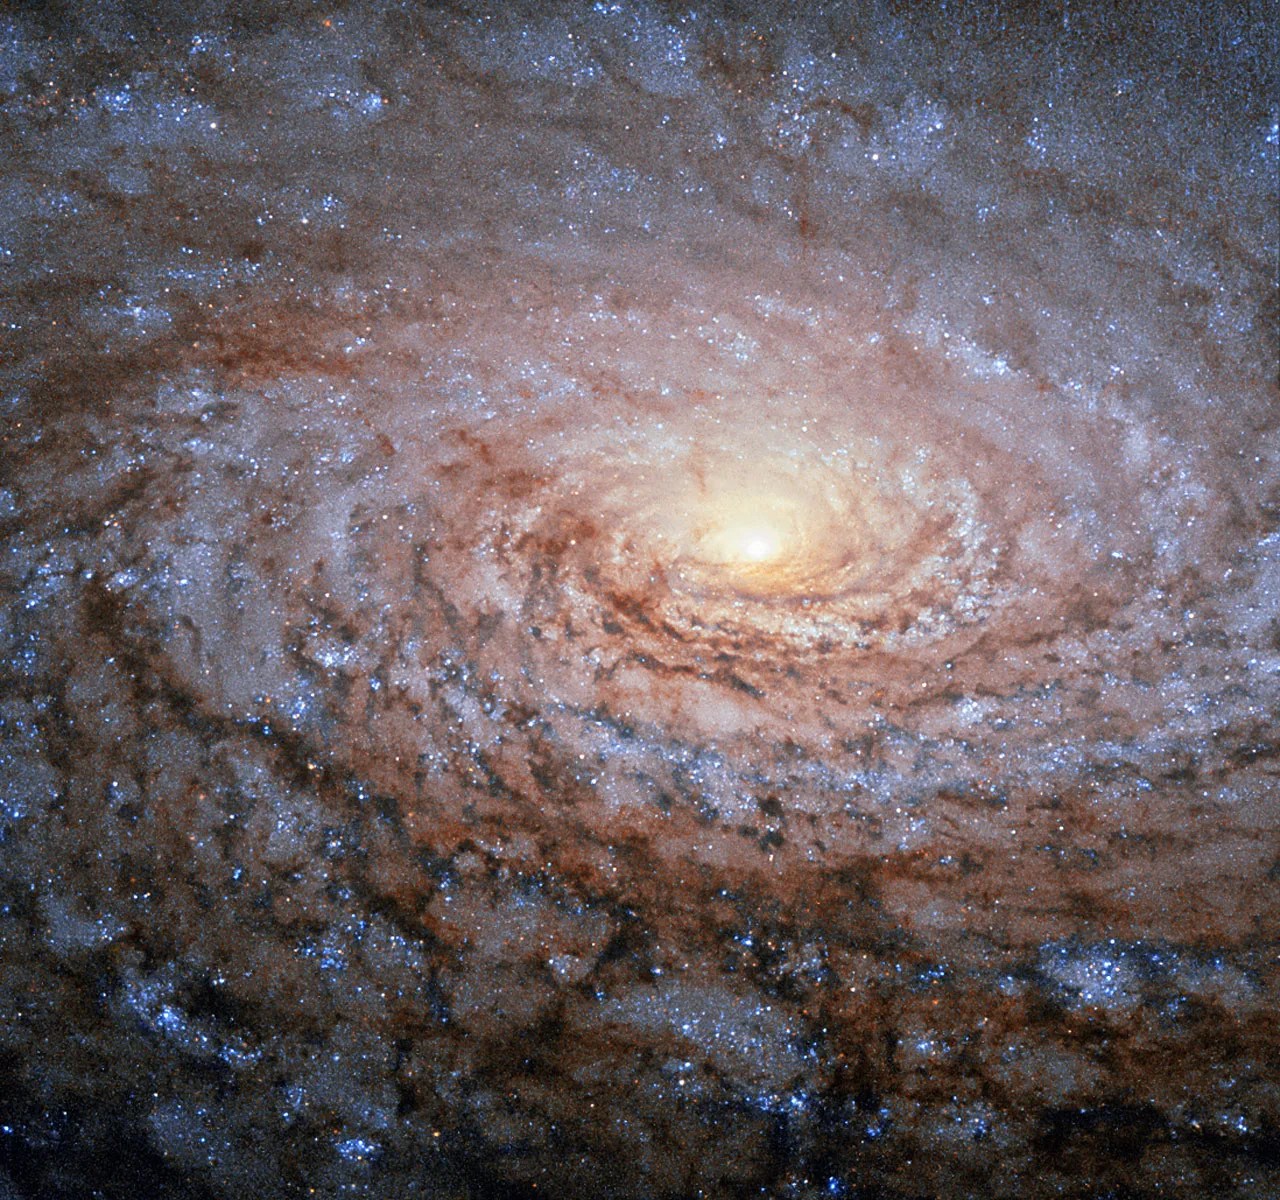 A swirling spiral galaxy with a bright core, and glowing bluish star clusters and dark dust lanes throughout its fluffy appearing arms.